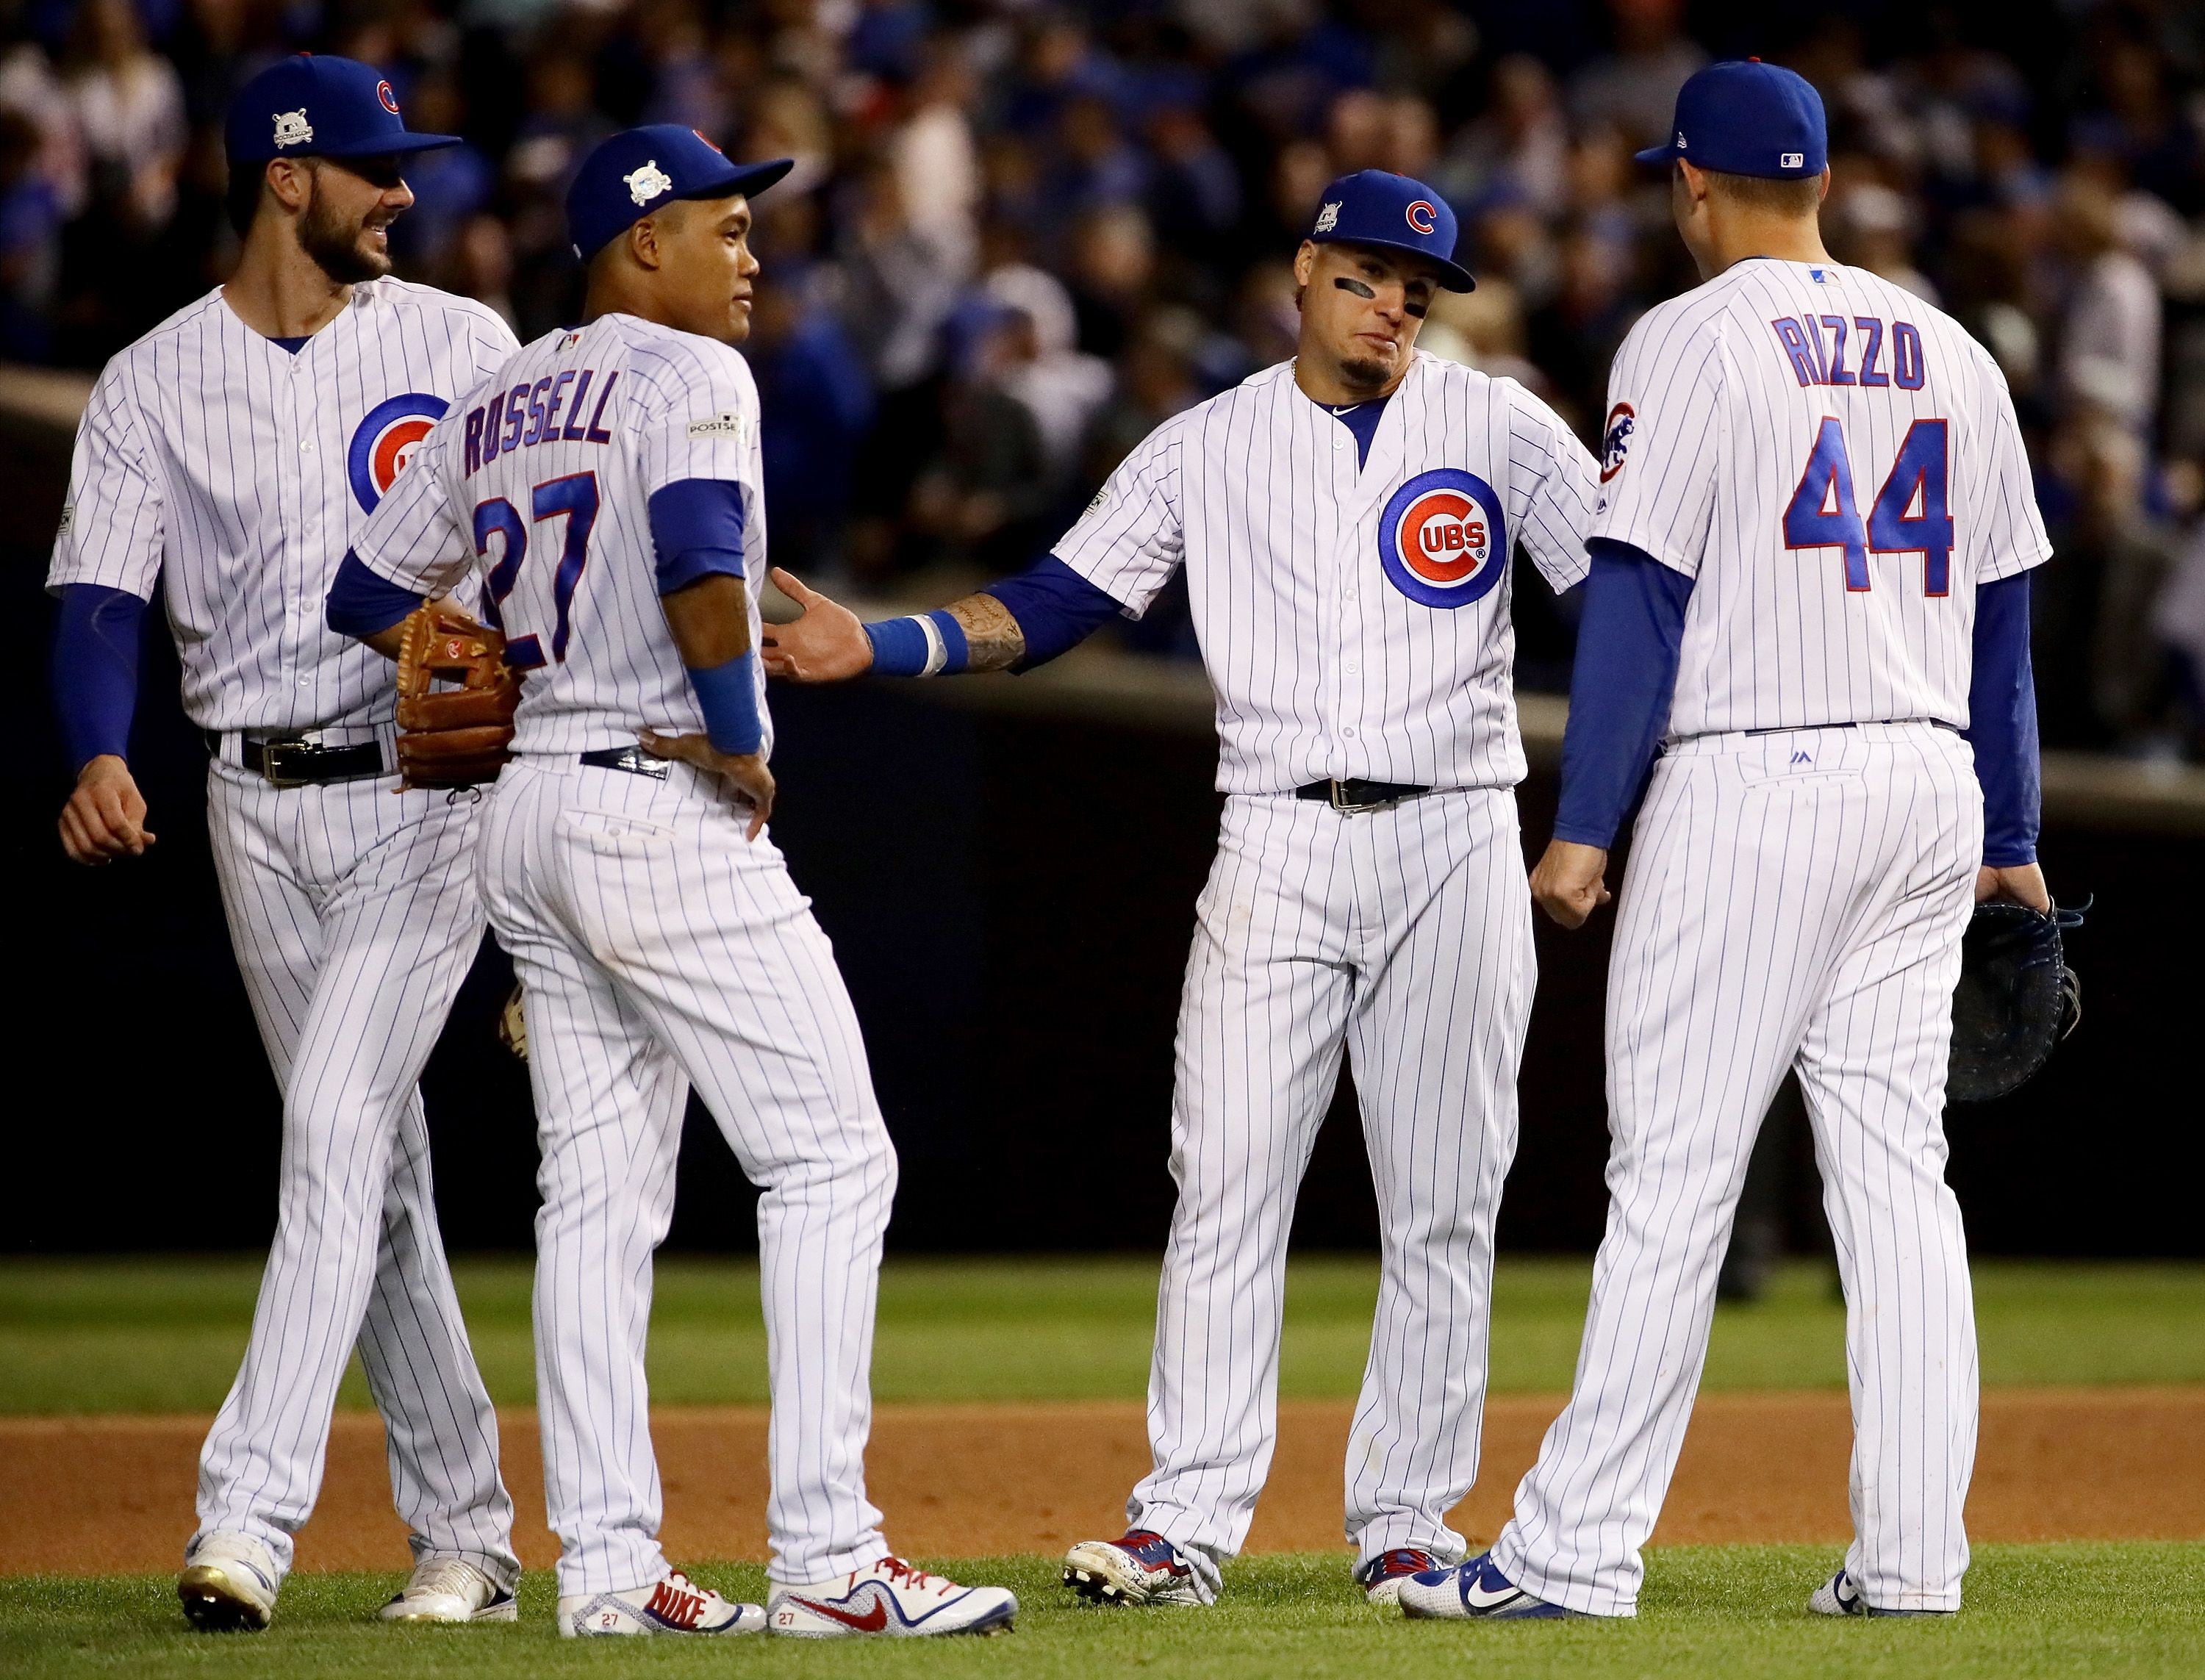 Chicago Cubs Roster might be set as we move towards spring training